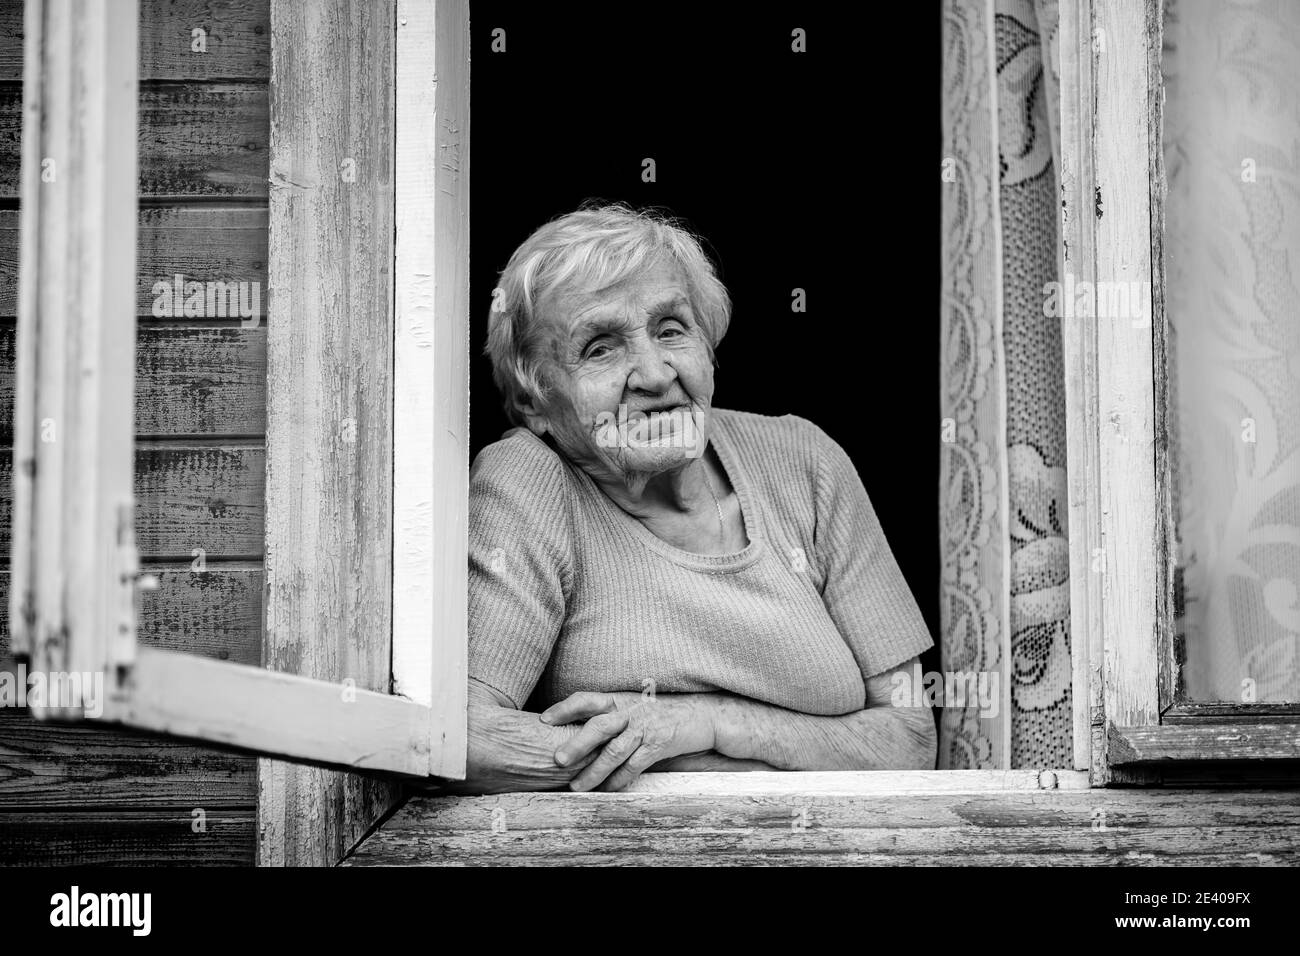 An elderly woman sitting and looking out the window. Black and white photo. Stock Photo